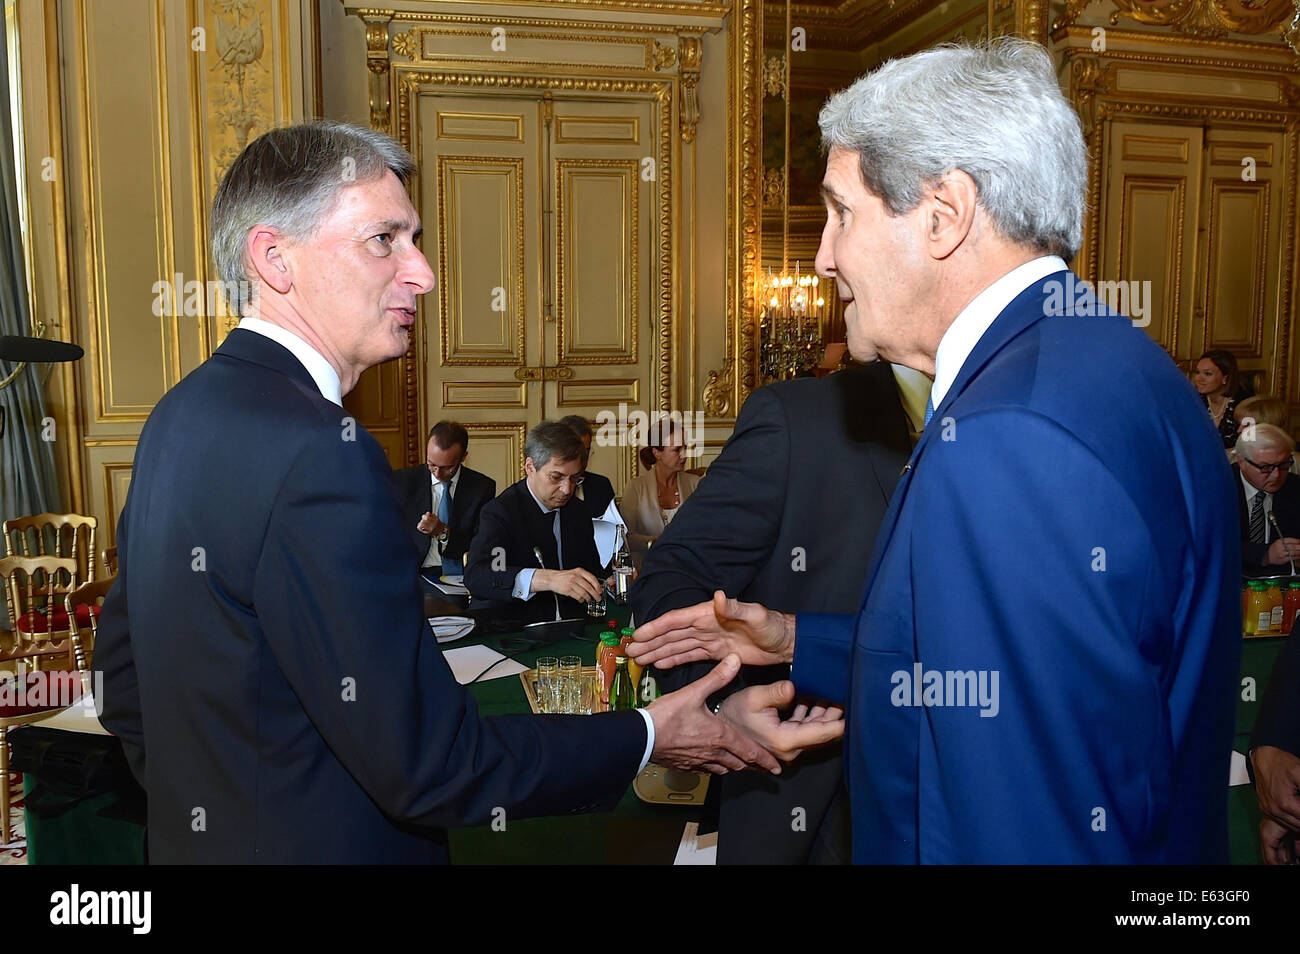 U.S. Secretary of State John Kerry greets British Foreign Secretary Philip Hammond -- their first face-to-face meeting since Hammond's recent appointment -- at the Quai d'Orsay in Paris, France, on July 26, 2014, before a meeting with a series of internat Stock Photo